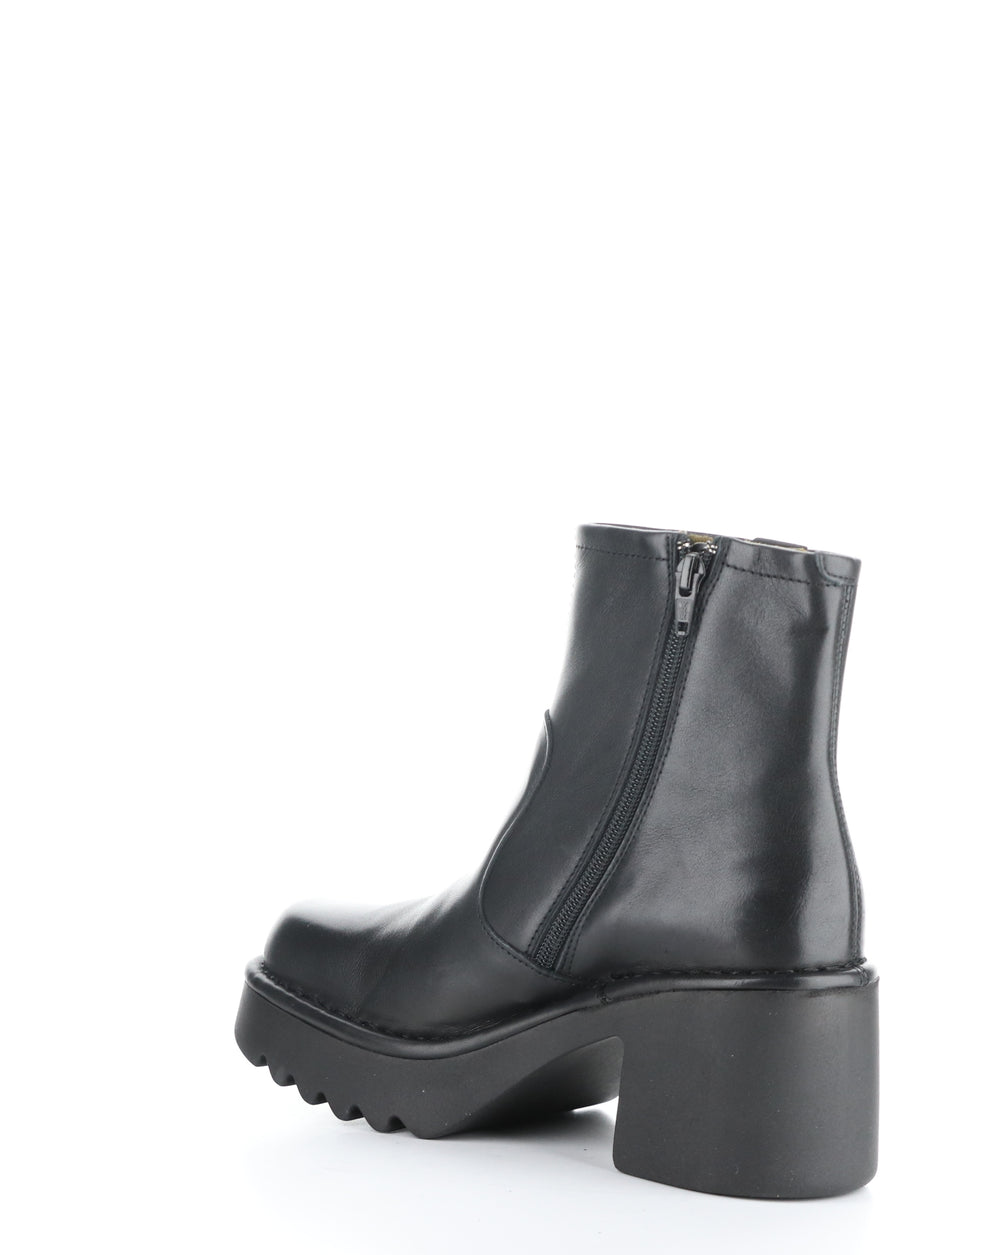 MOGE250FLY 000 BLACK Round Toe Boots